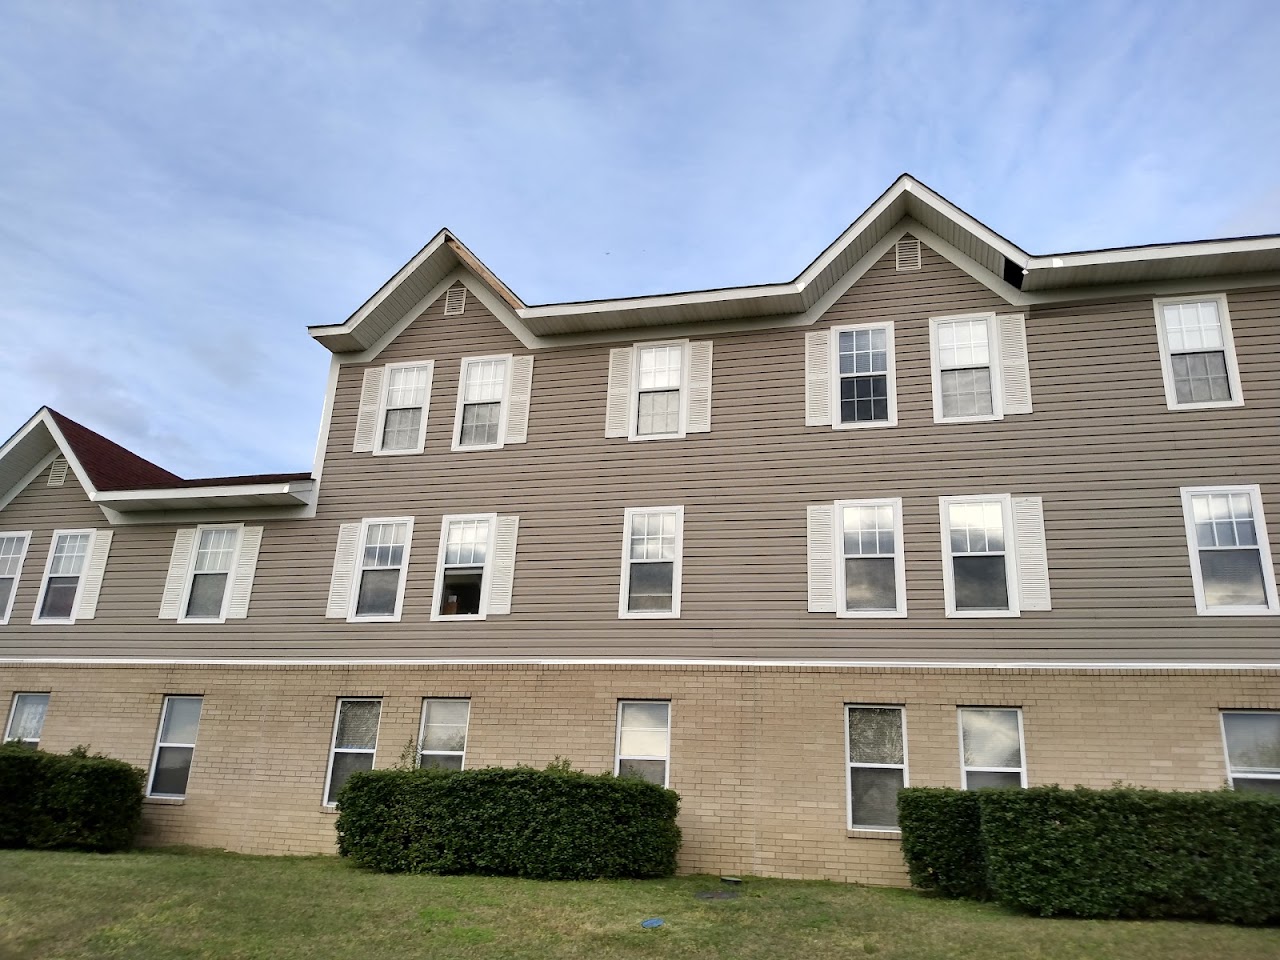 Photo of LEFLER ESTATES APTS. Affordable housing located at 813 HWY 65 S CLINTON, AR 72031